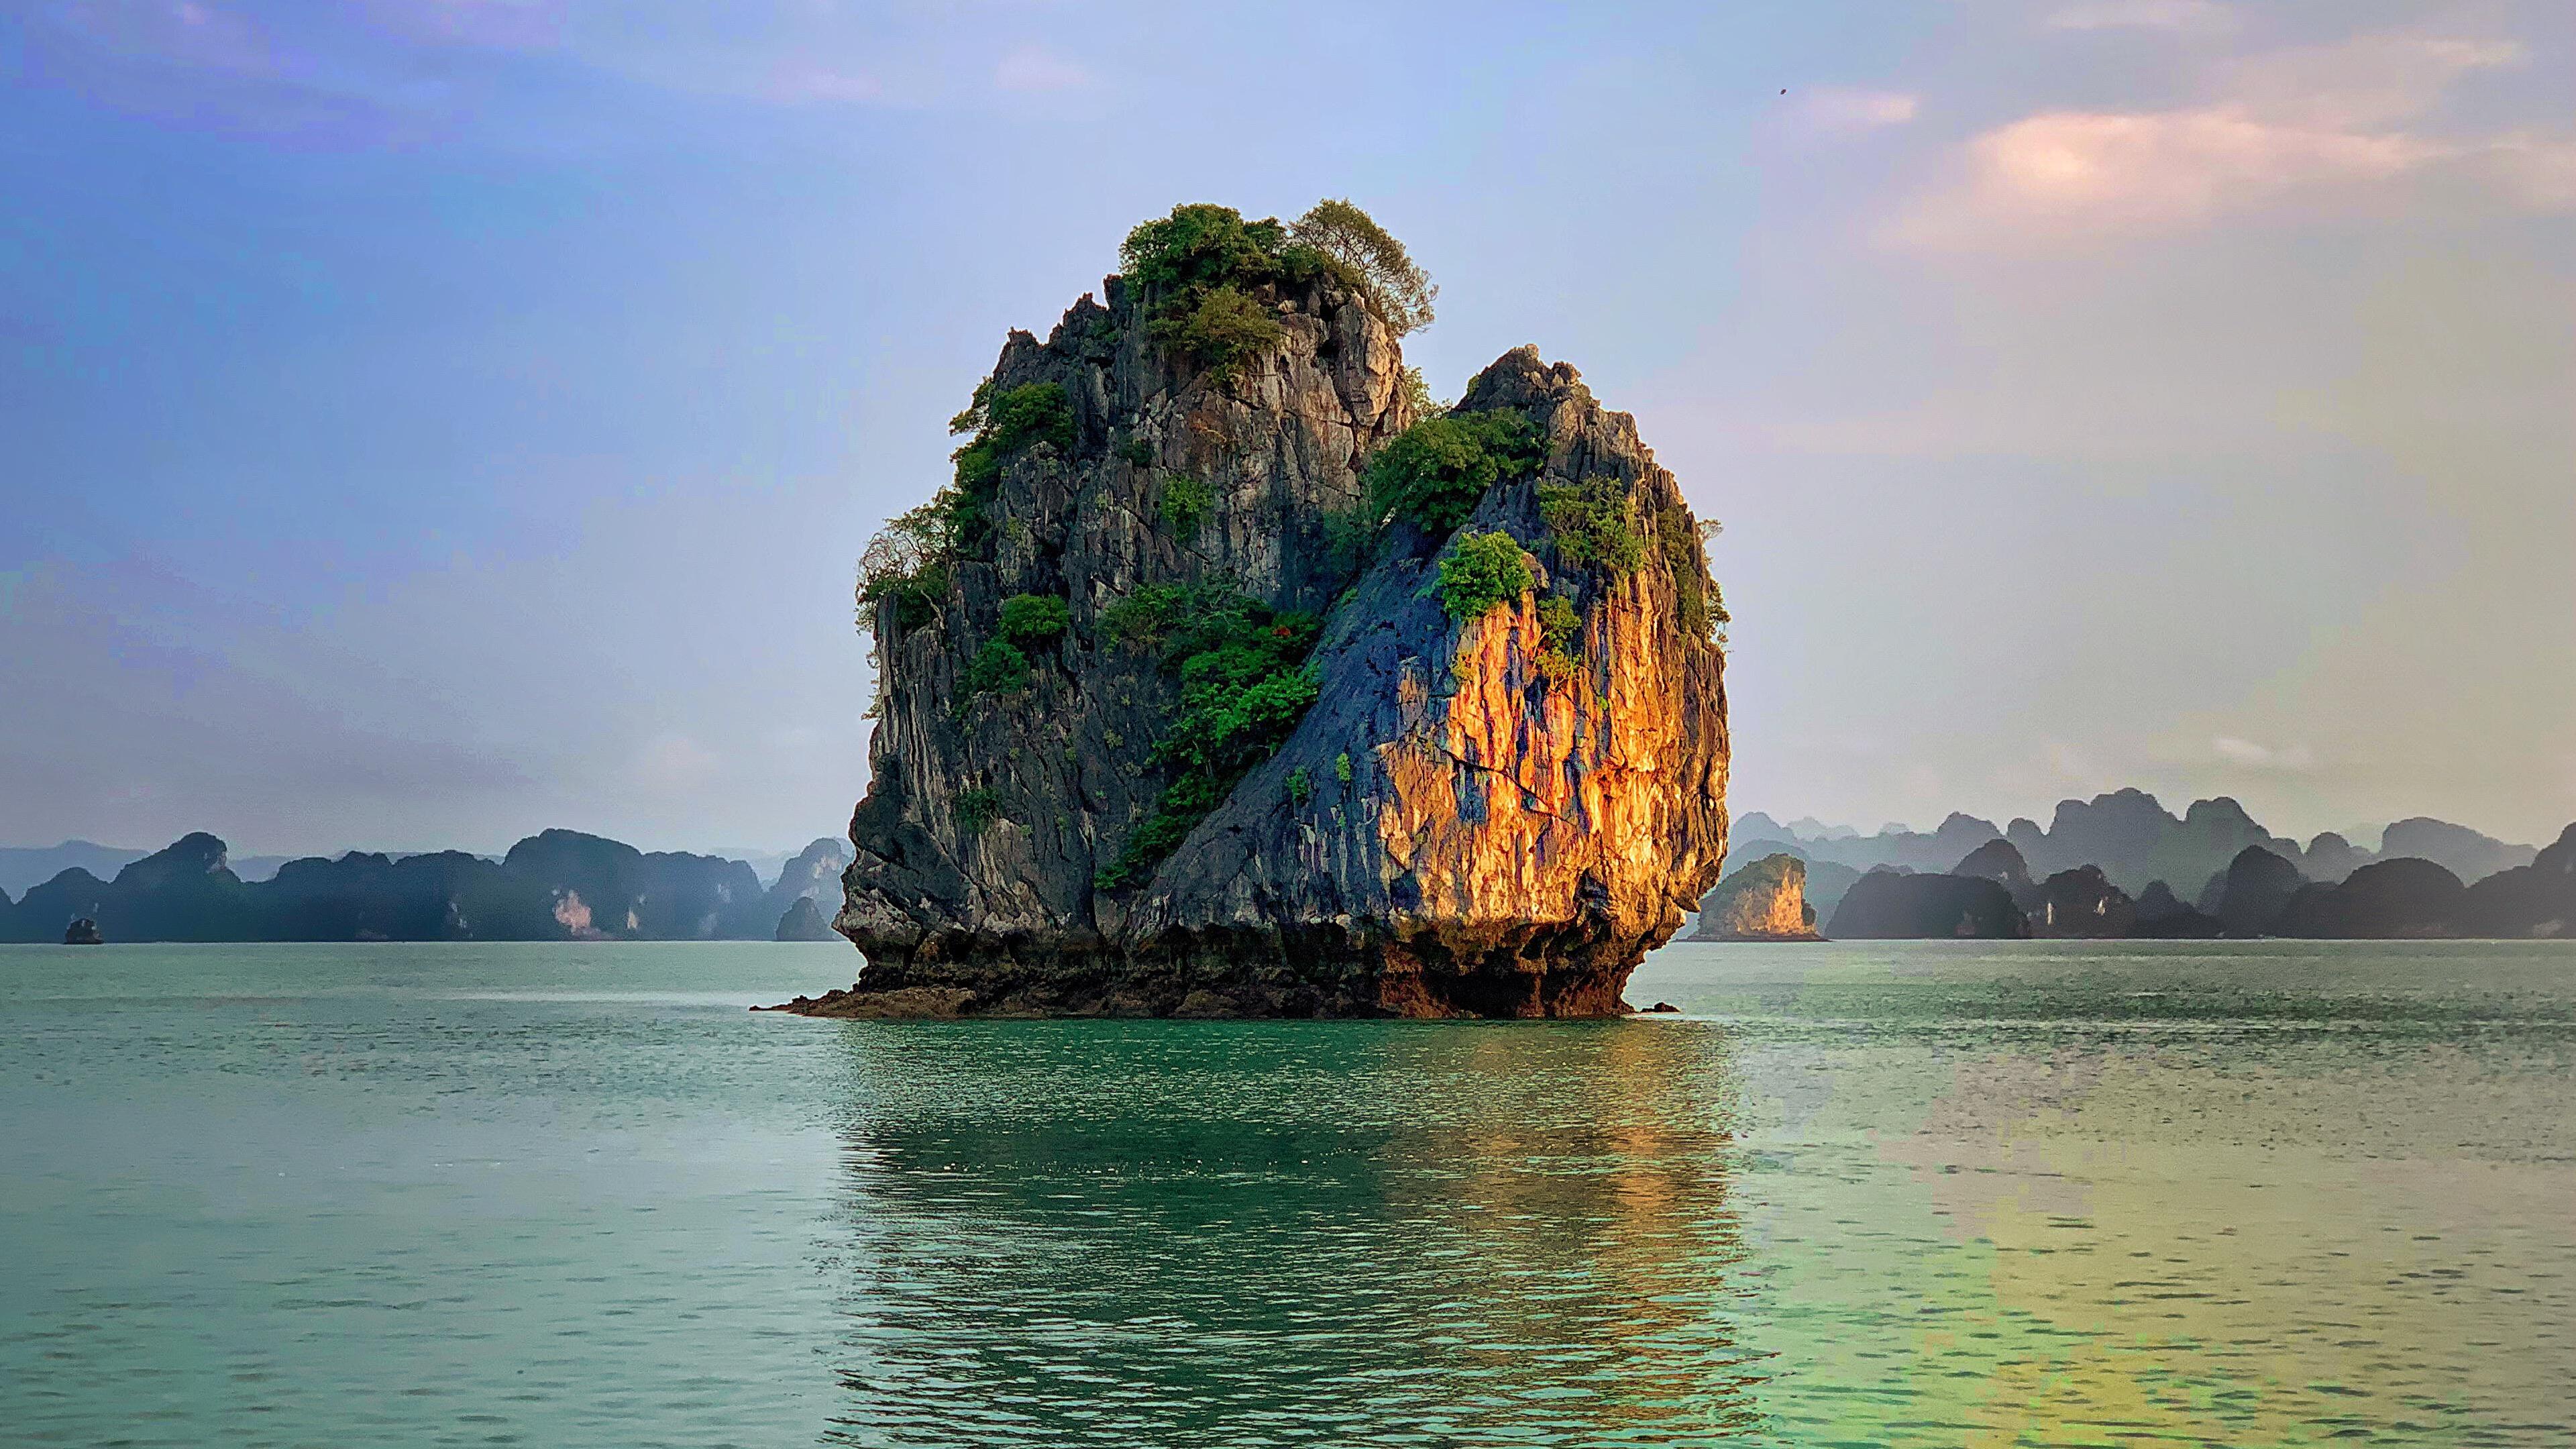 Halong 4K wallpaper for your desktop or mobile screen free and easy to download